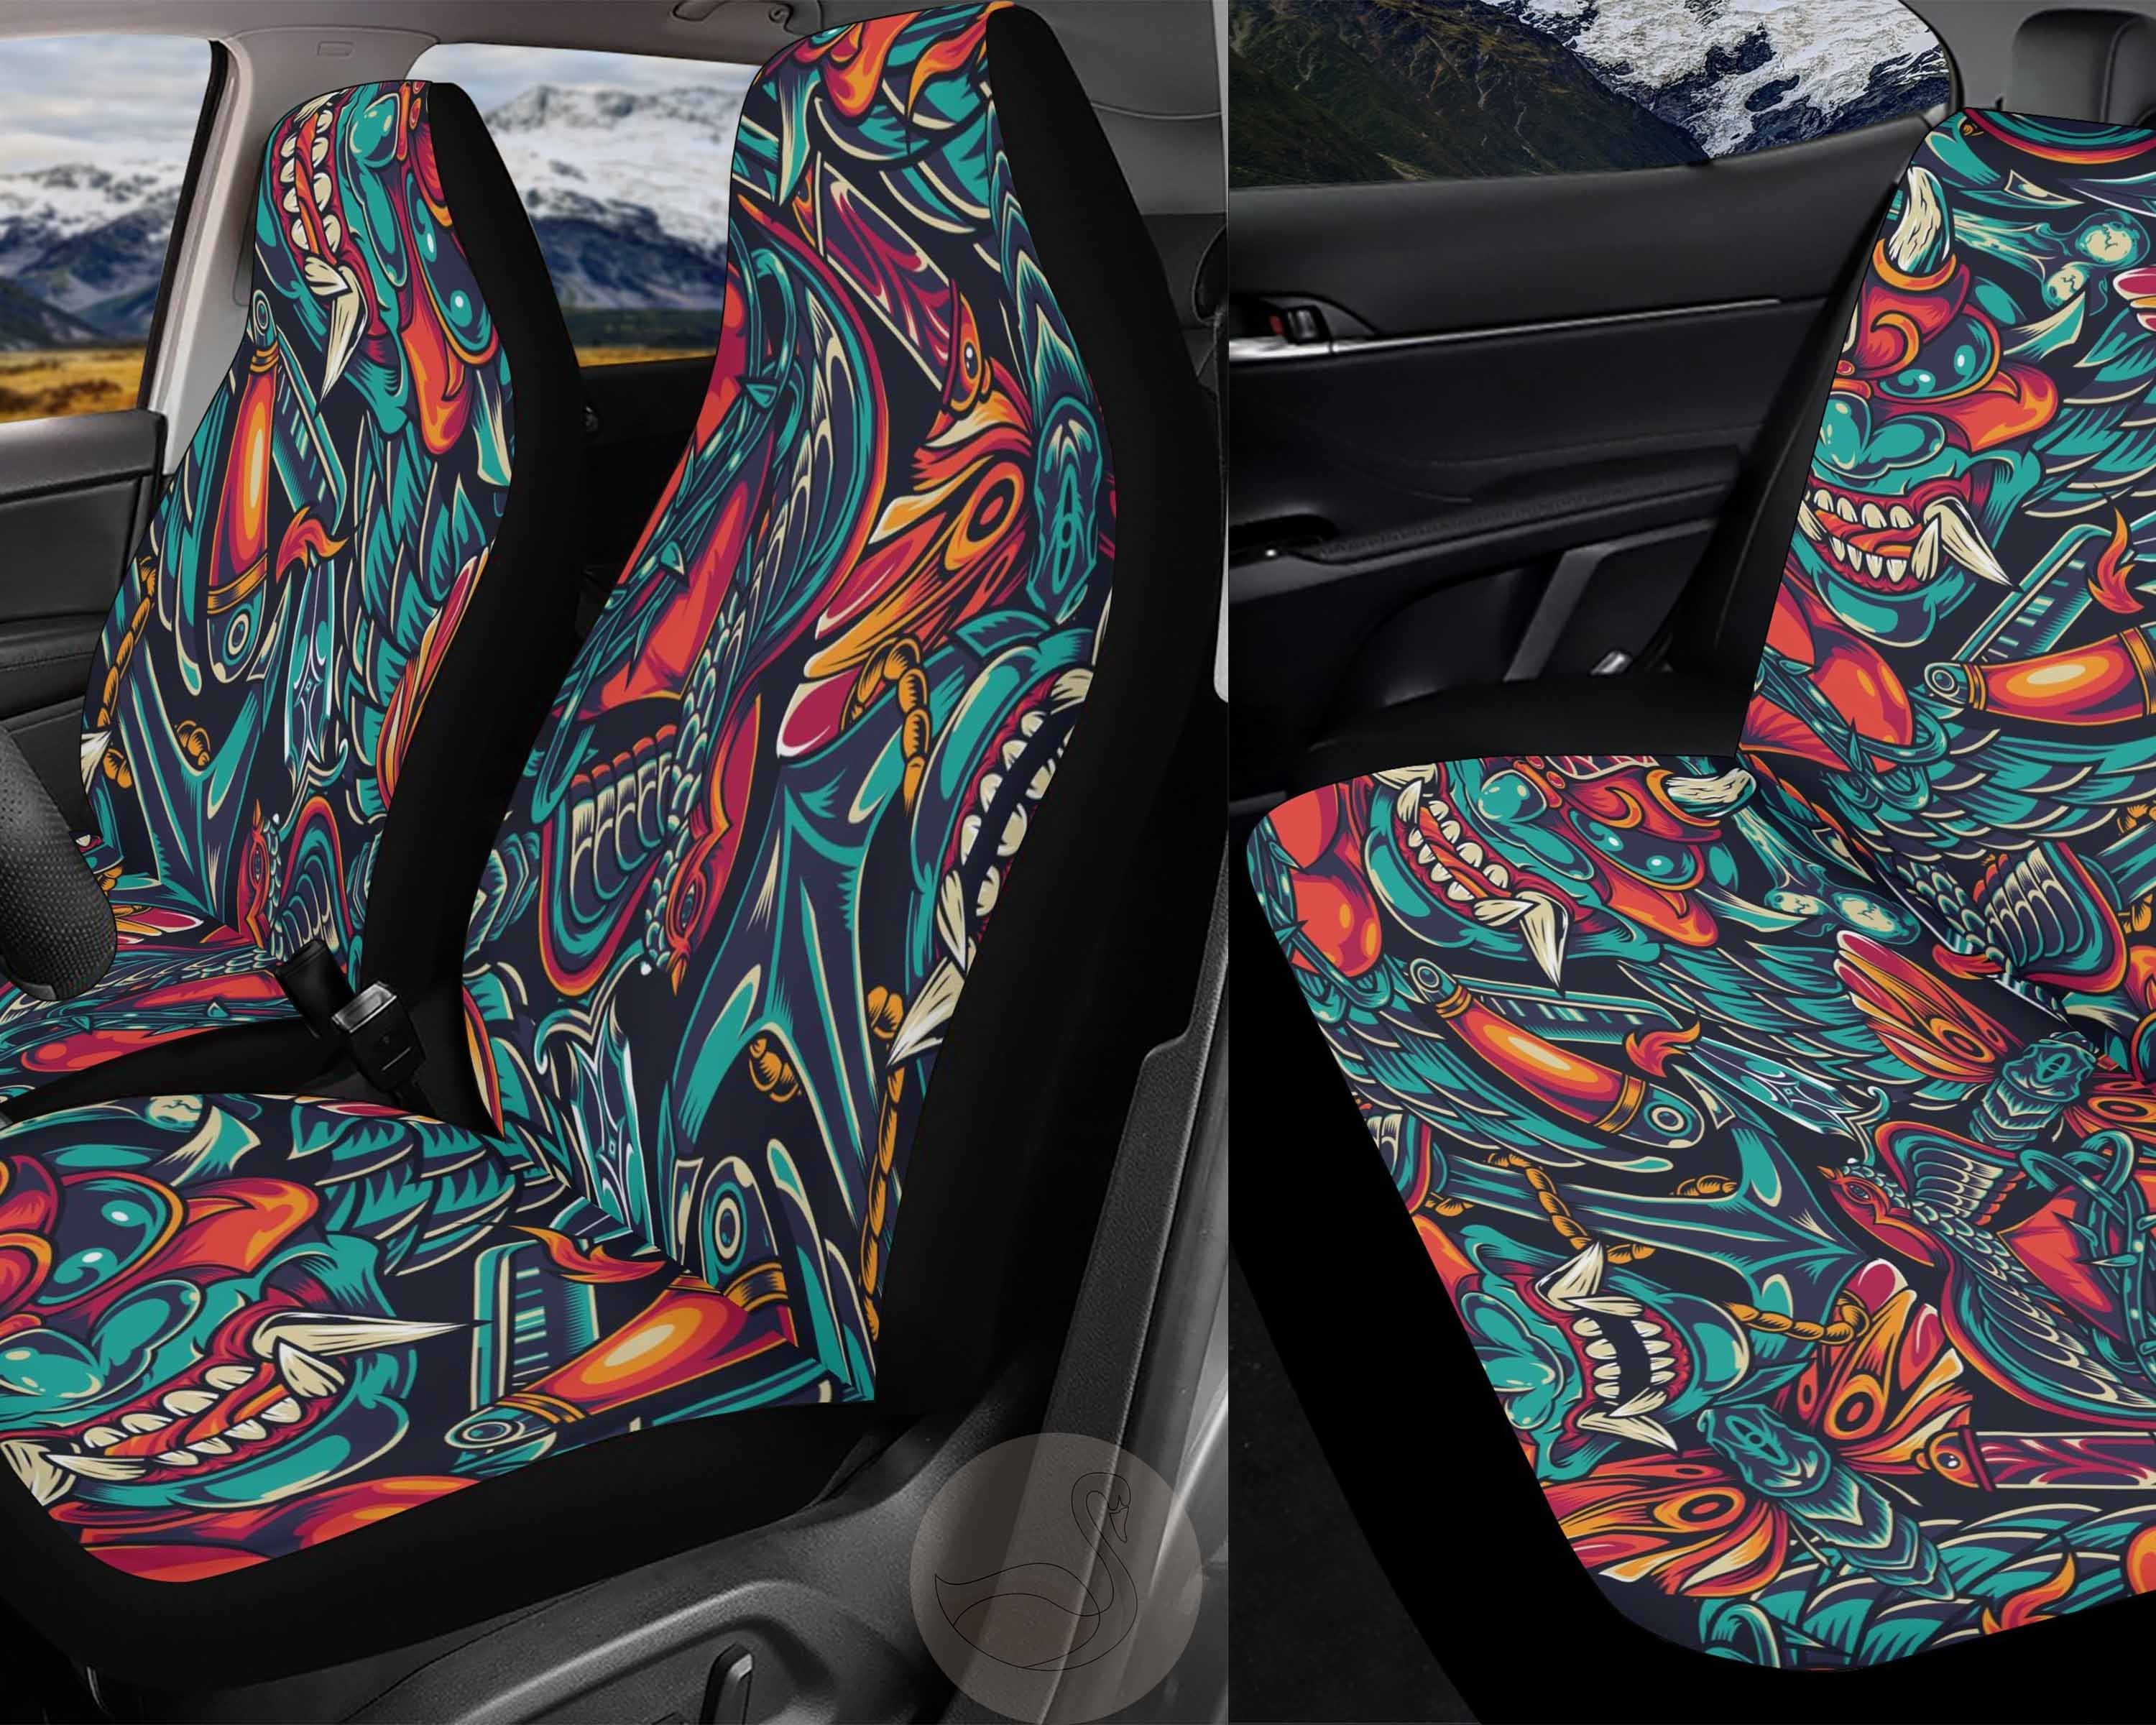 Retro Car Seat Covers, Goth Car Decor Aesthetic Gift for Him,skull Car  Decorations,gothic Car Accessories for Men,tattoo Car Lover Gift 